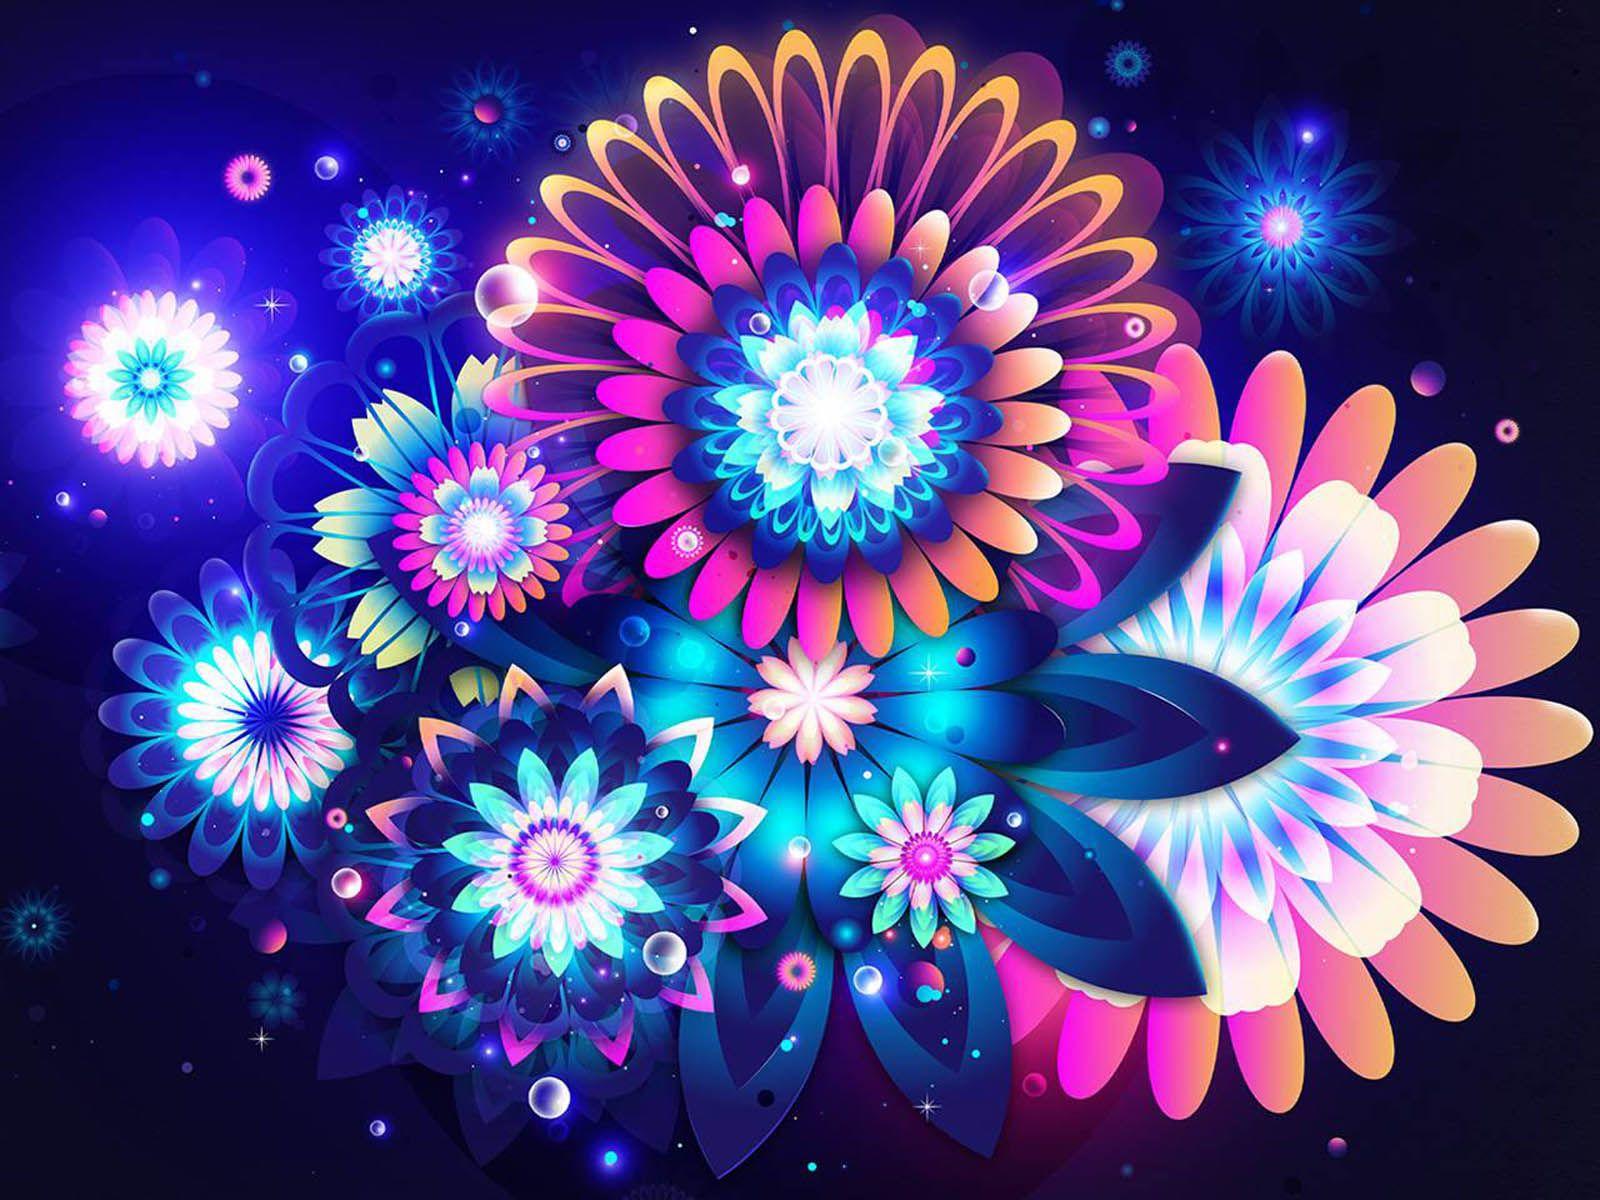 Abstract Digital Flowers Art Wallpaper. Abstract Graphic